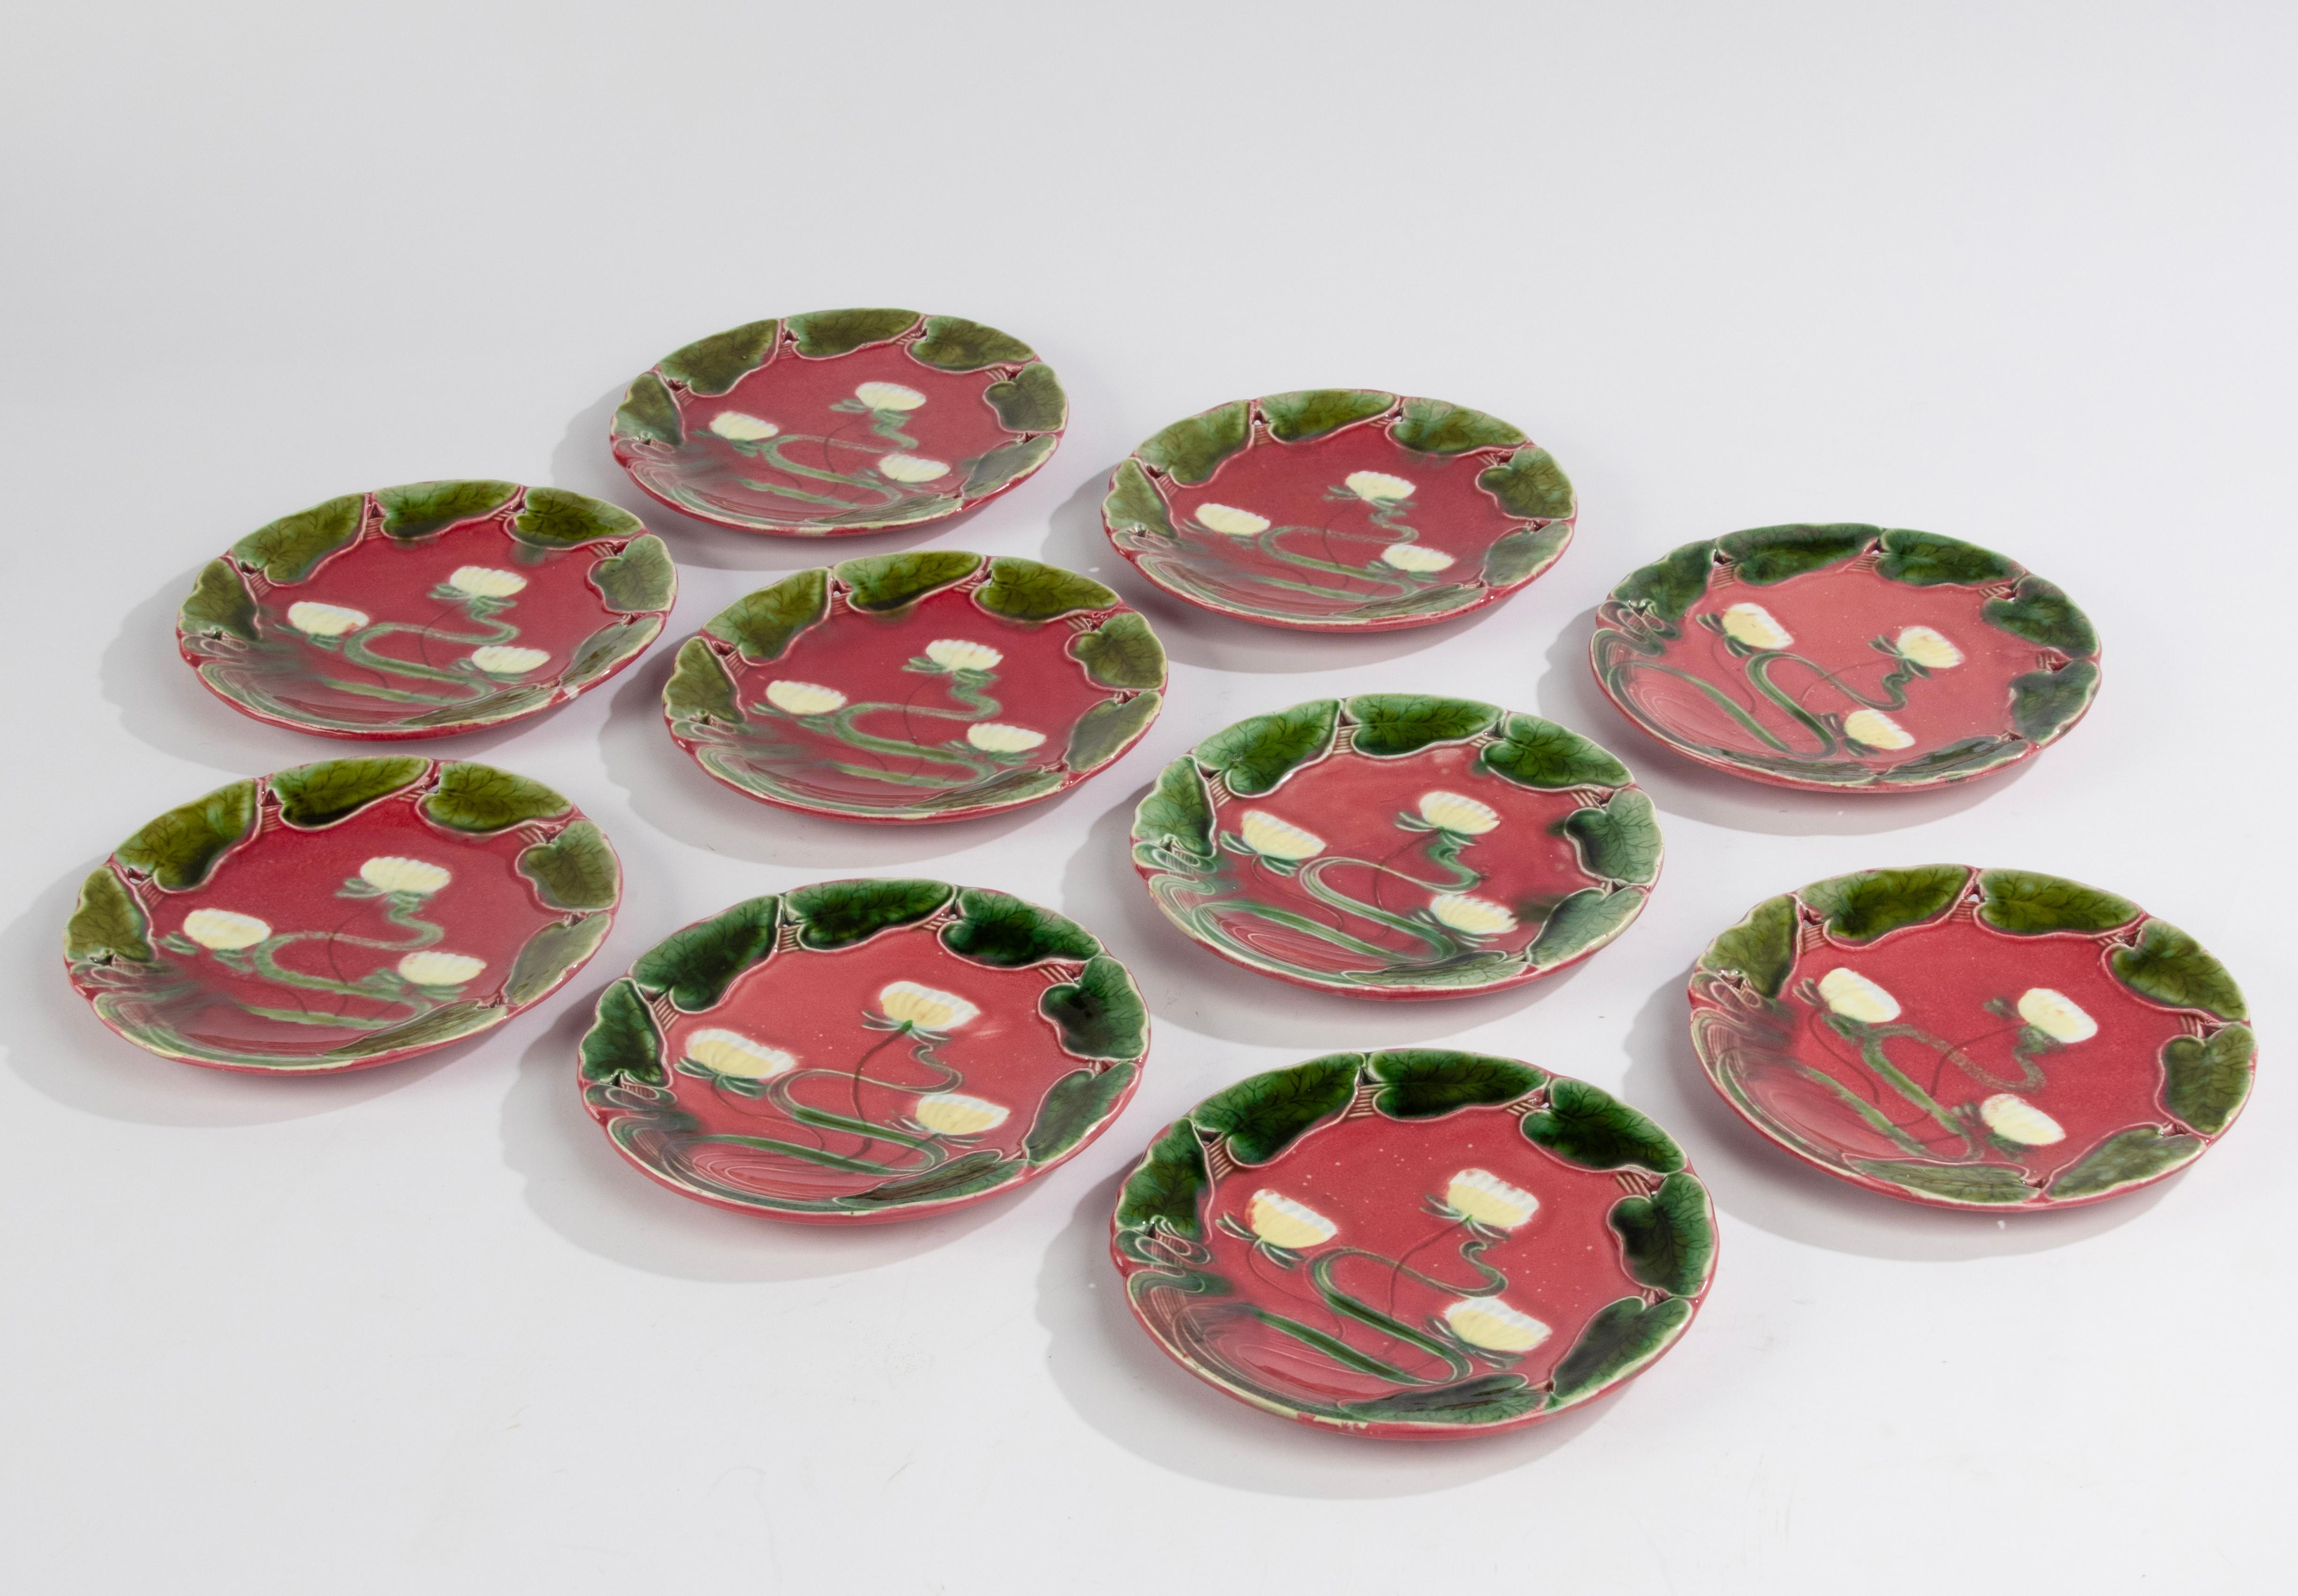 Hand-Crafted 10-Piece Set Majolica Art Nouveau Plates - Water Lilly Pattern - Villeroy & Boch For Sale